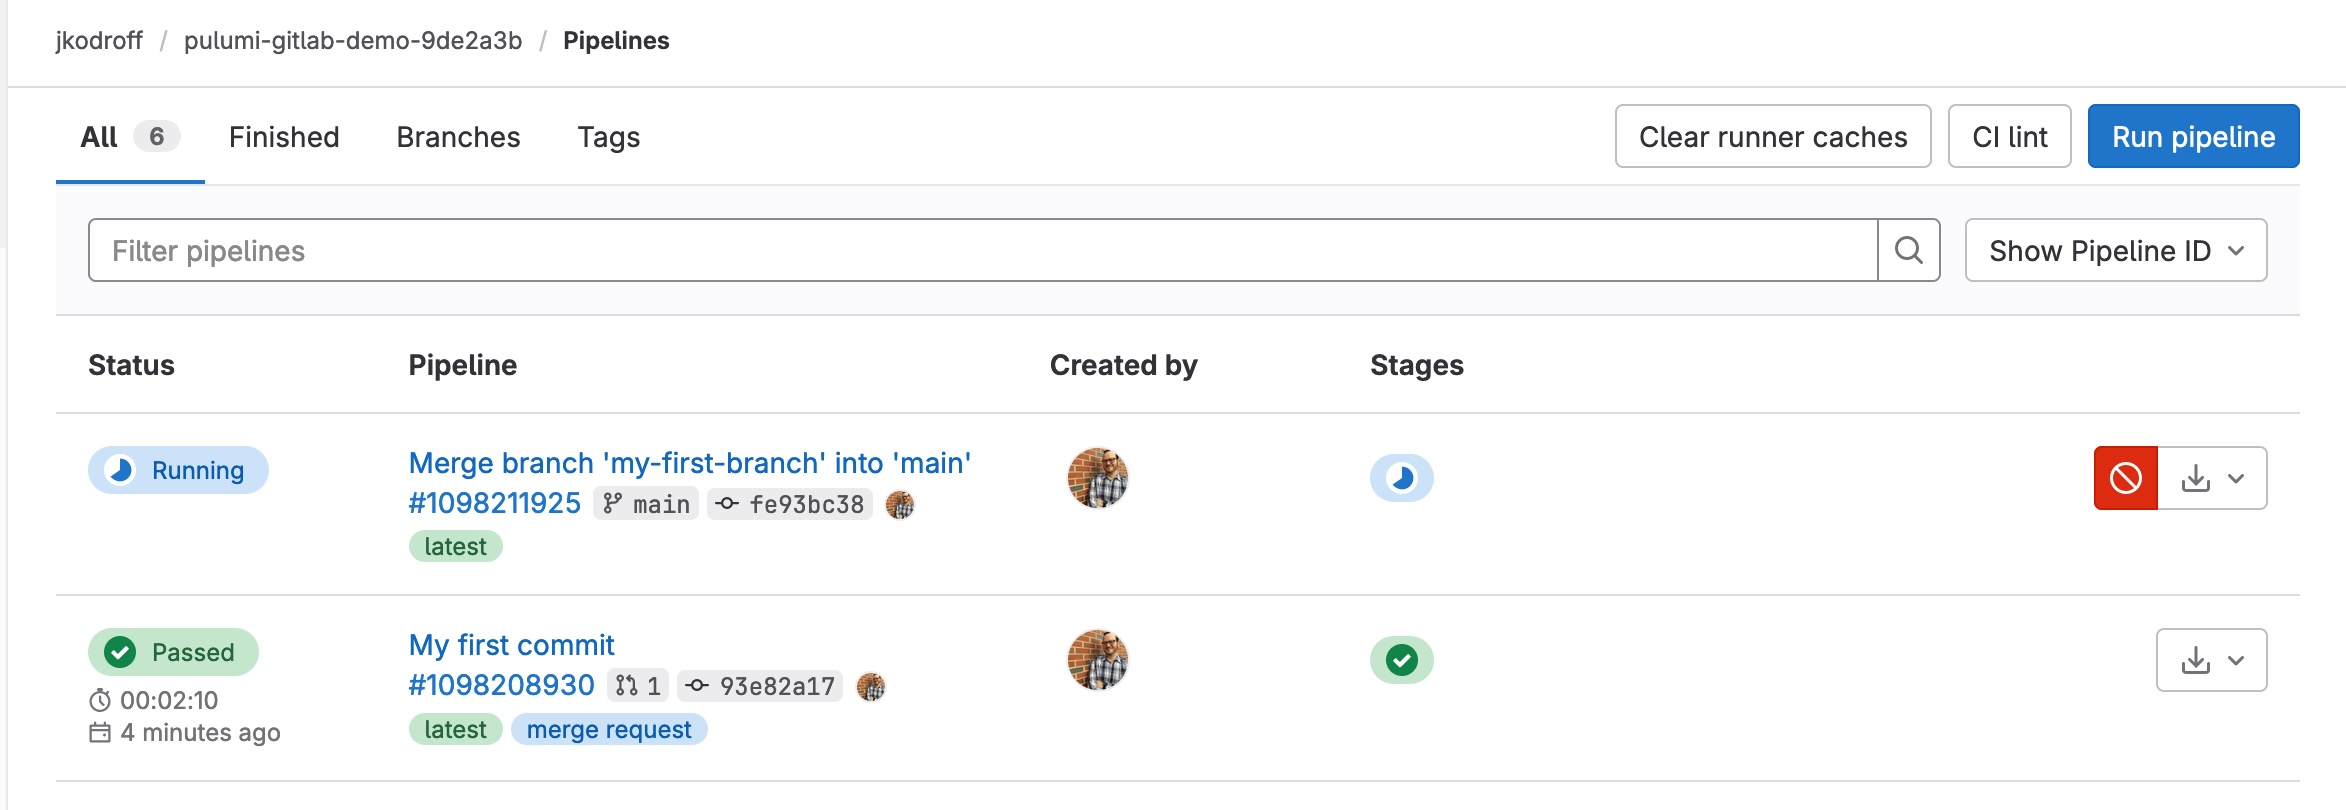 Screenshot of the GitLab pipelines screen showing a running pipeline along with a passed pipelines